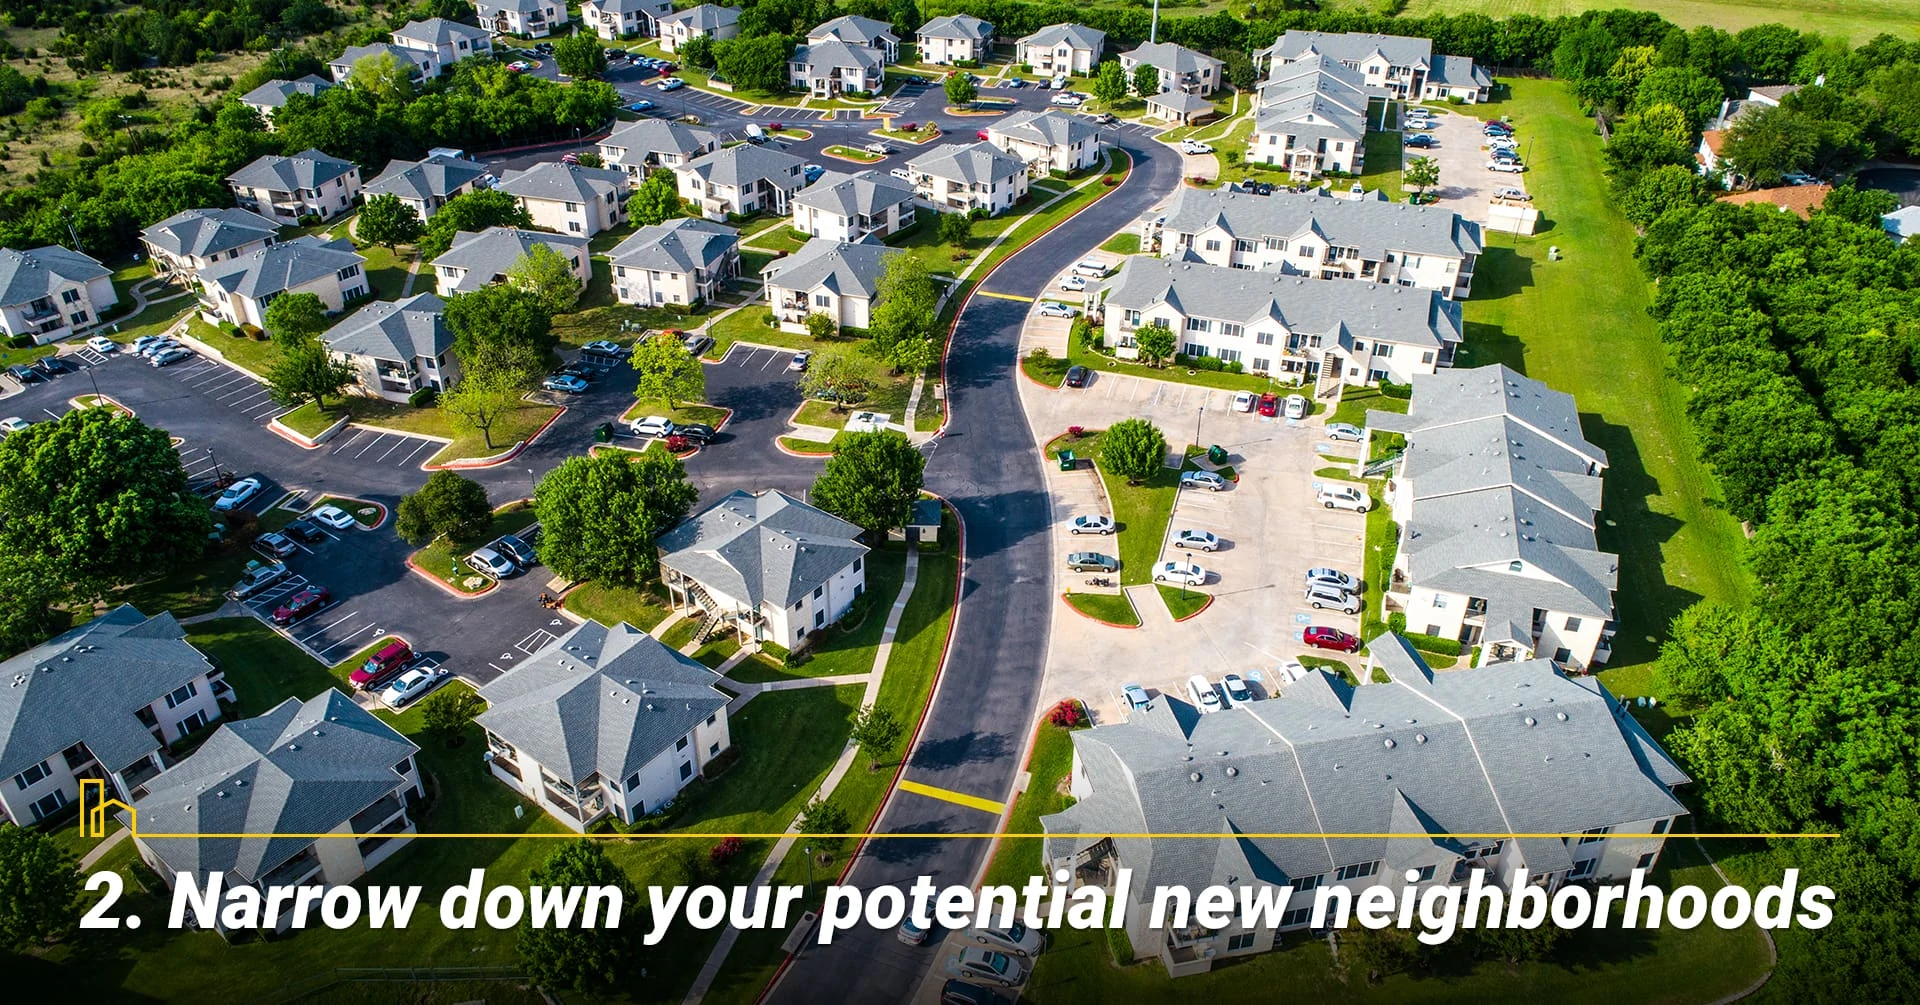 Narrow down your potential new neighborhoods, location location location